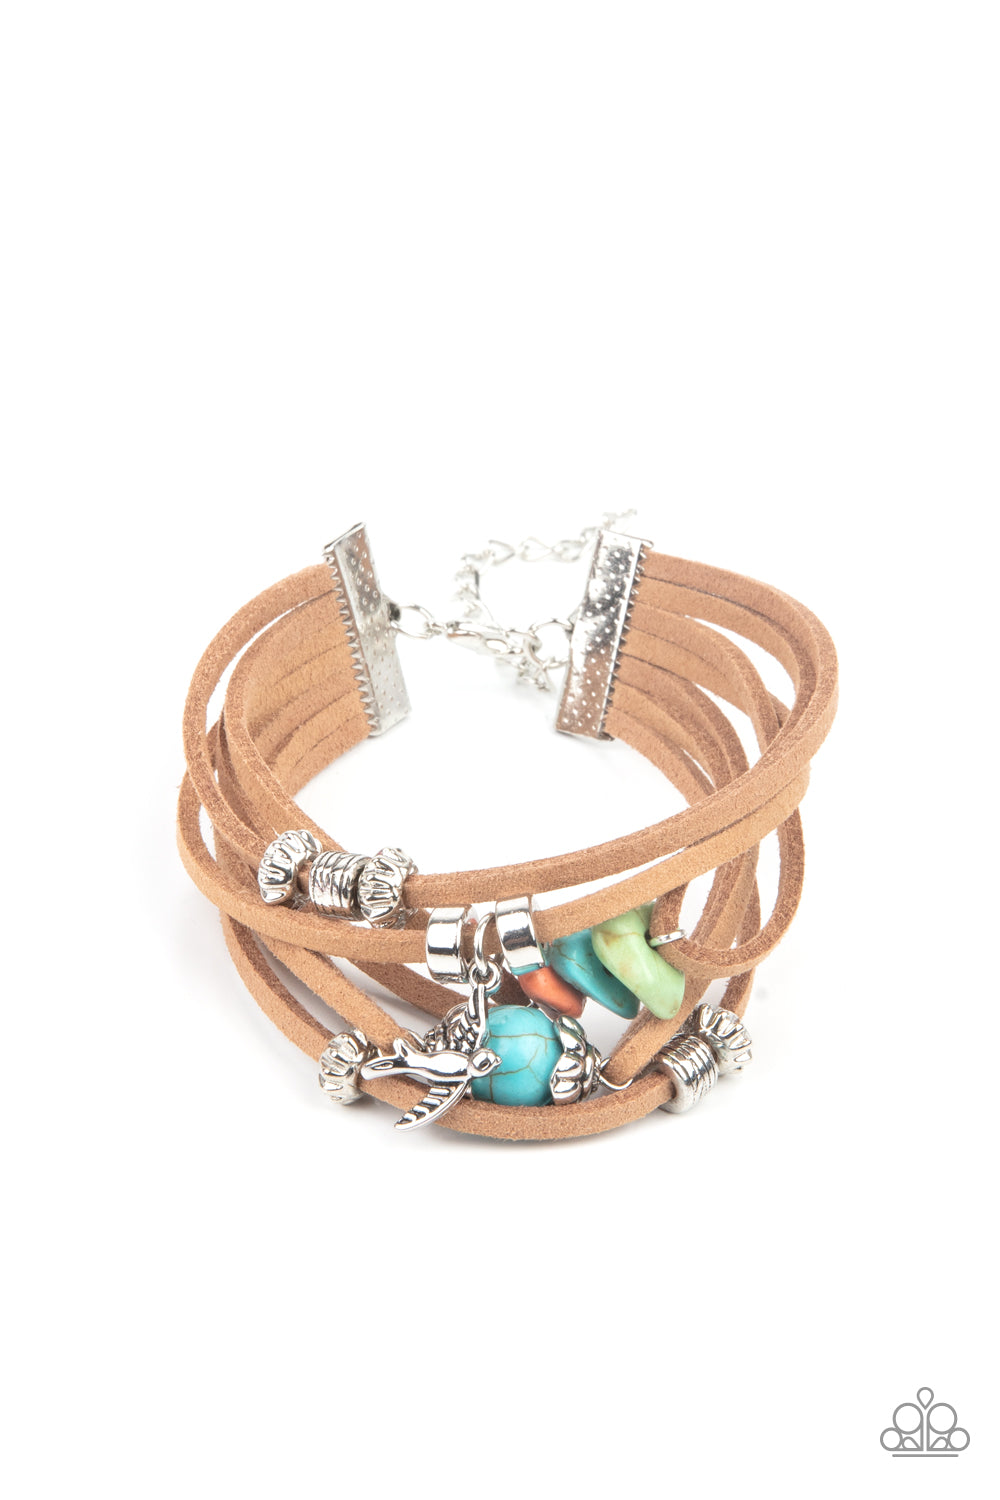 Canyon Flight Multi Urban Bracelet - Paparazzi Accessories  Infused with a dainty silver bird charm, dainty strands of brown suede are adorned in mismatched silver accents and multicolored stones for a colorfully layered look. Features an adjustable clasp closure.  All Paparazzi Accessories are lead free and nickel free!  Sold as one individual bracelet.